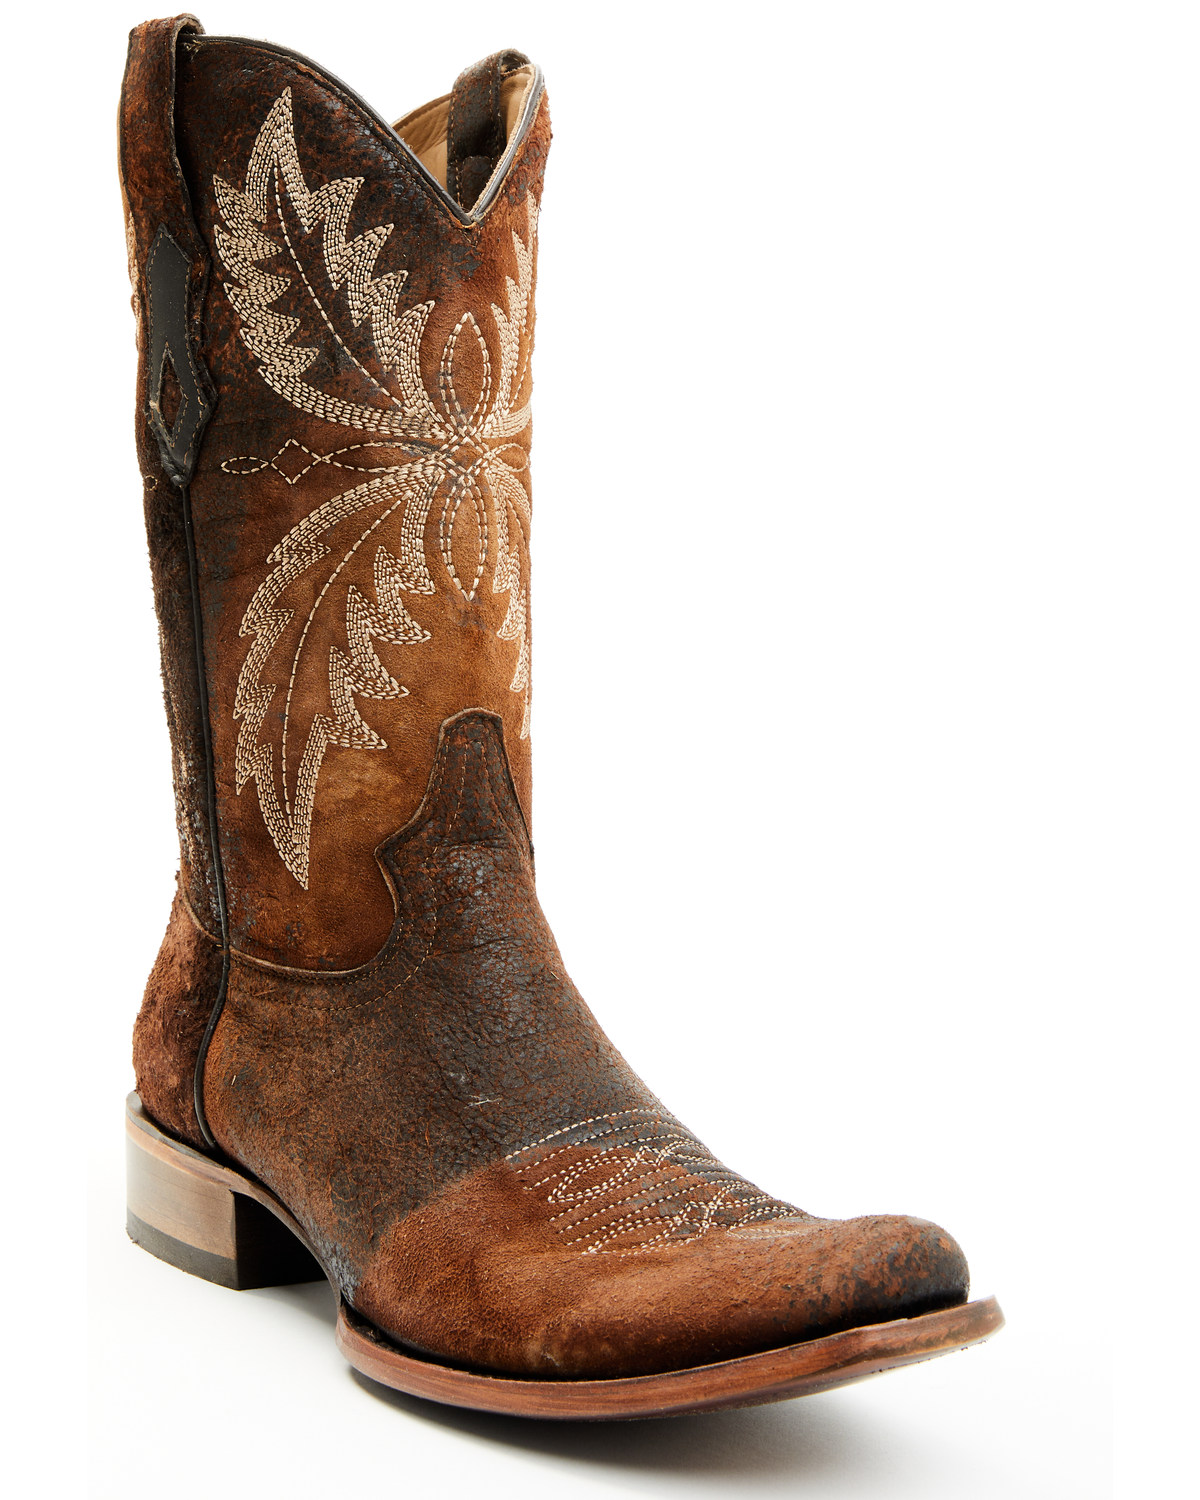 Corral Men's Embroidered Western Boots - Square Toe